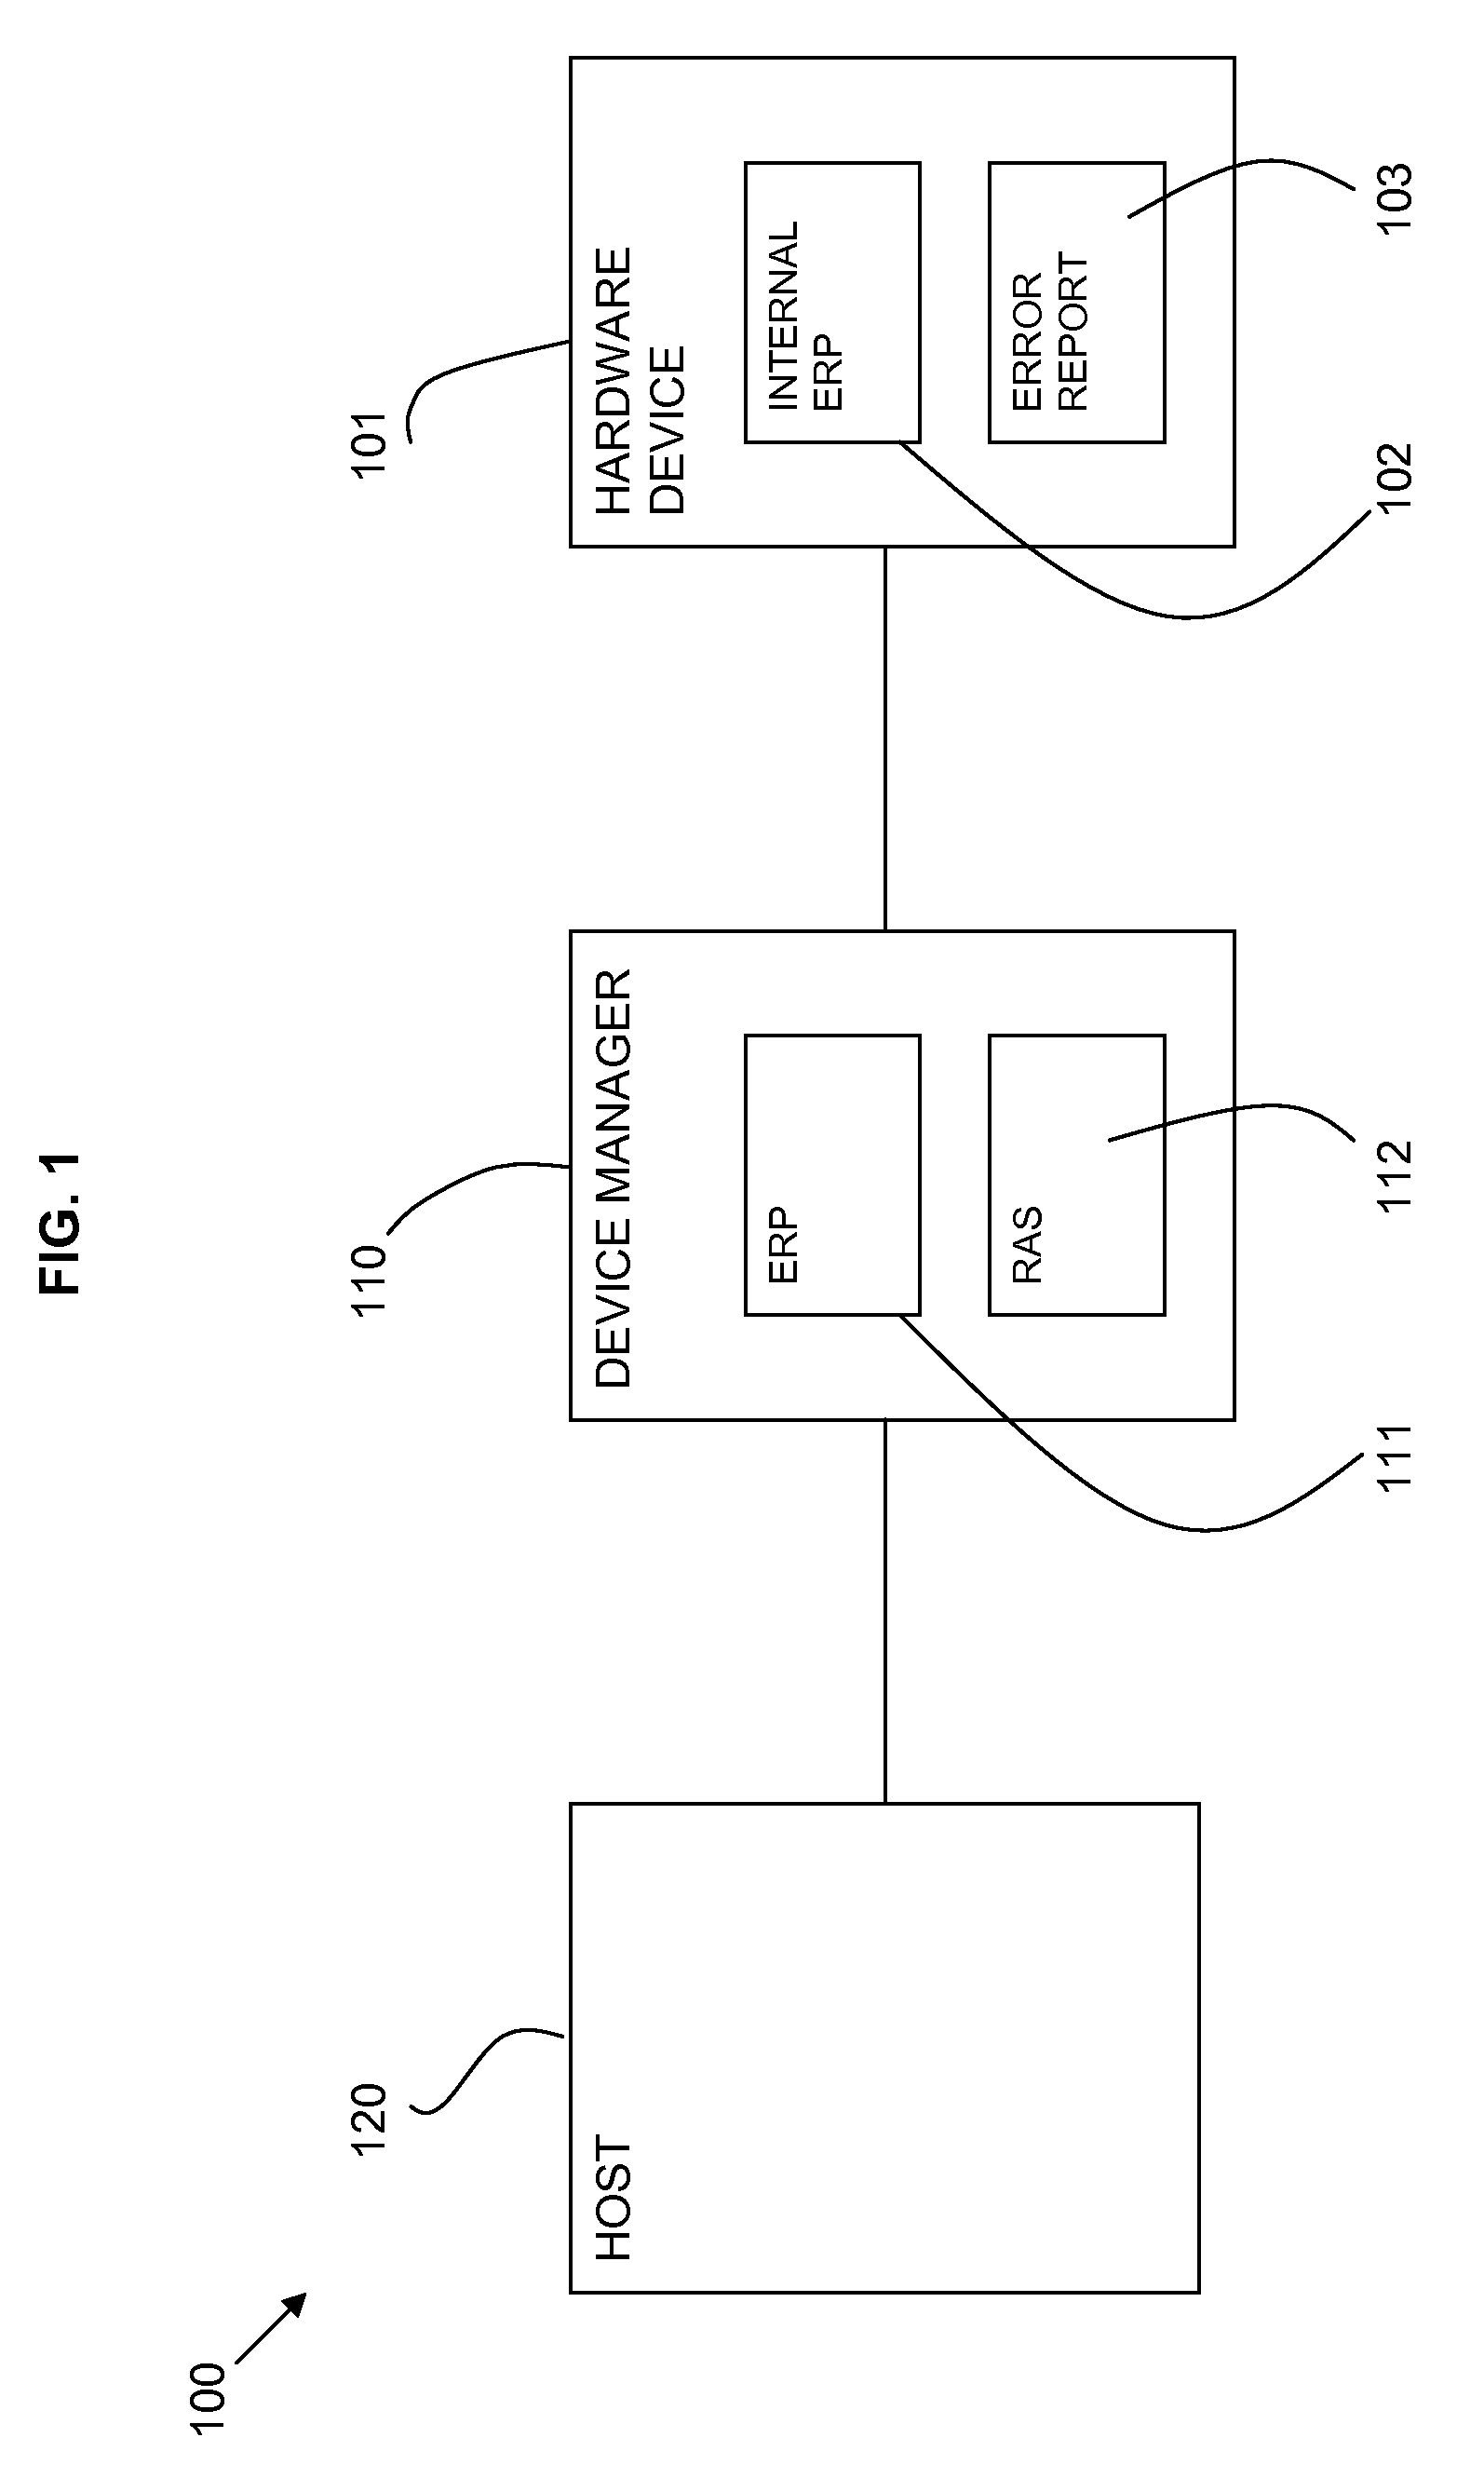 Method and system for error recovery of a hardware device